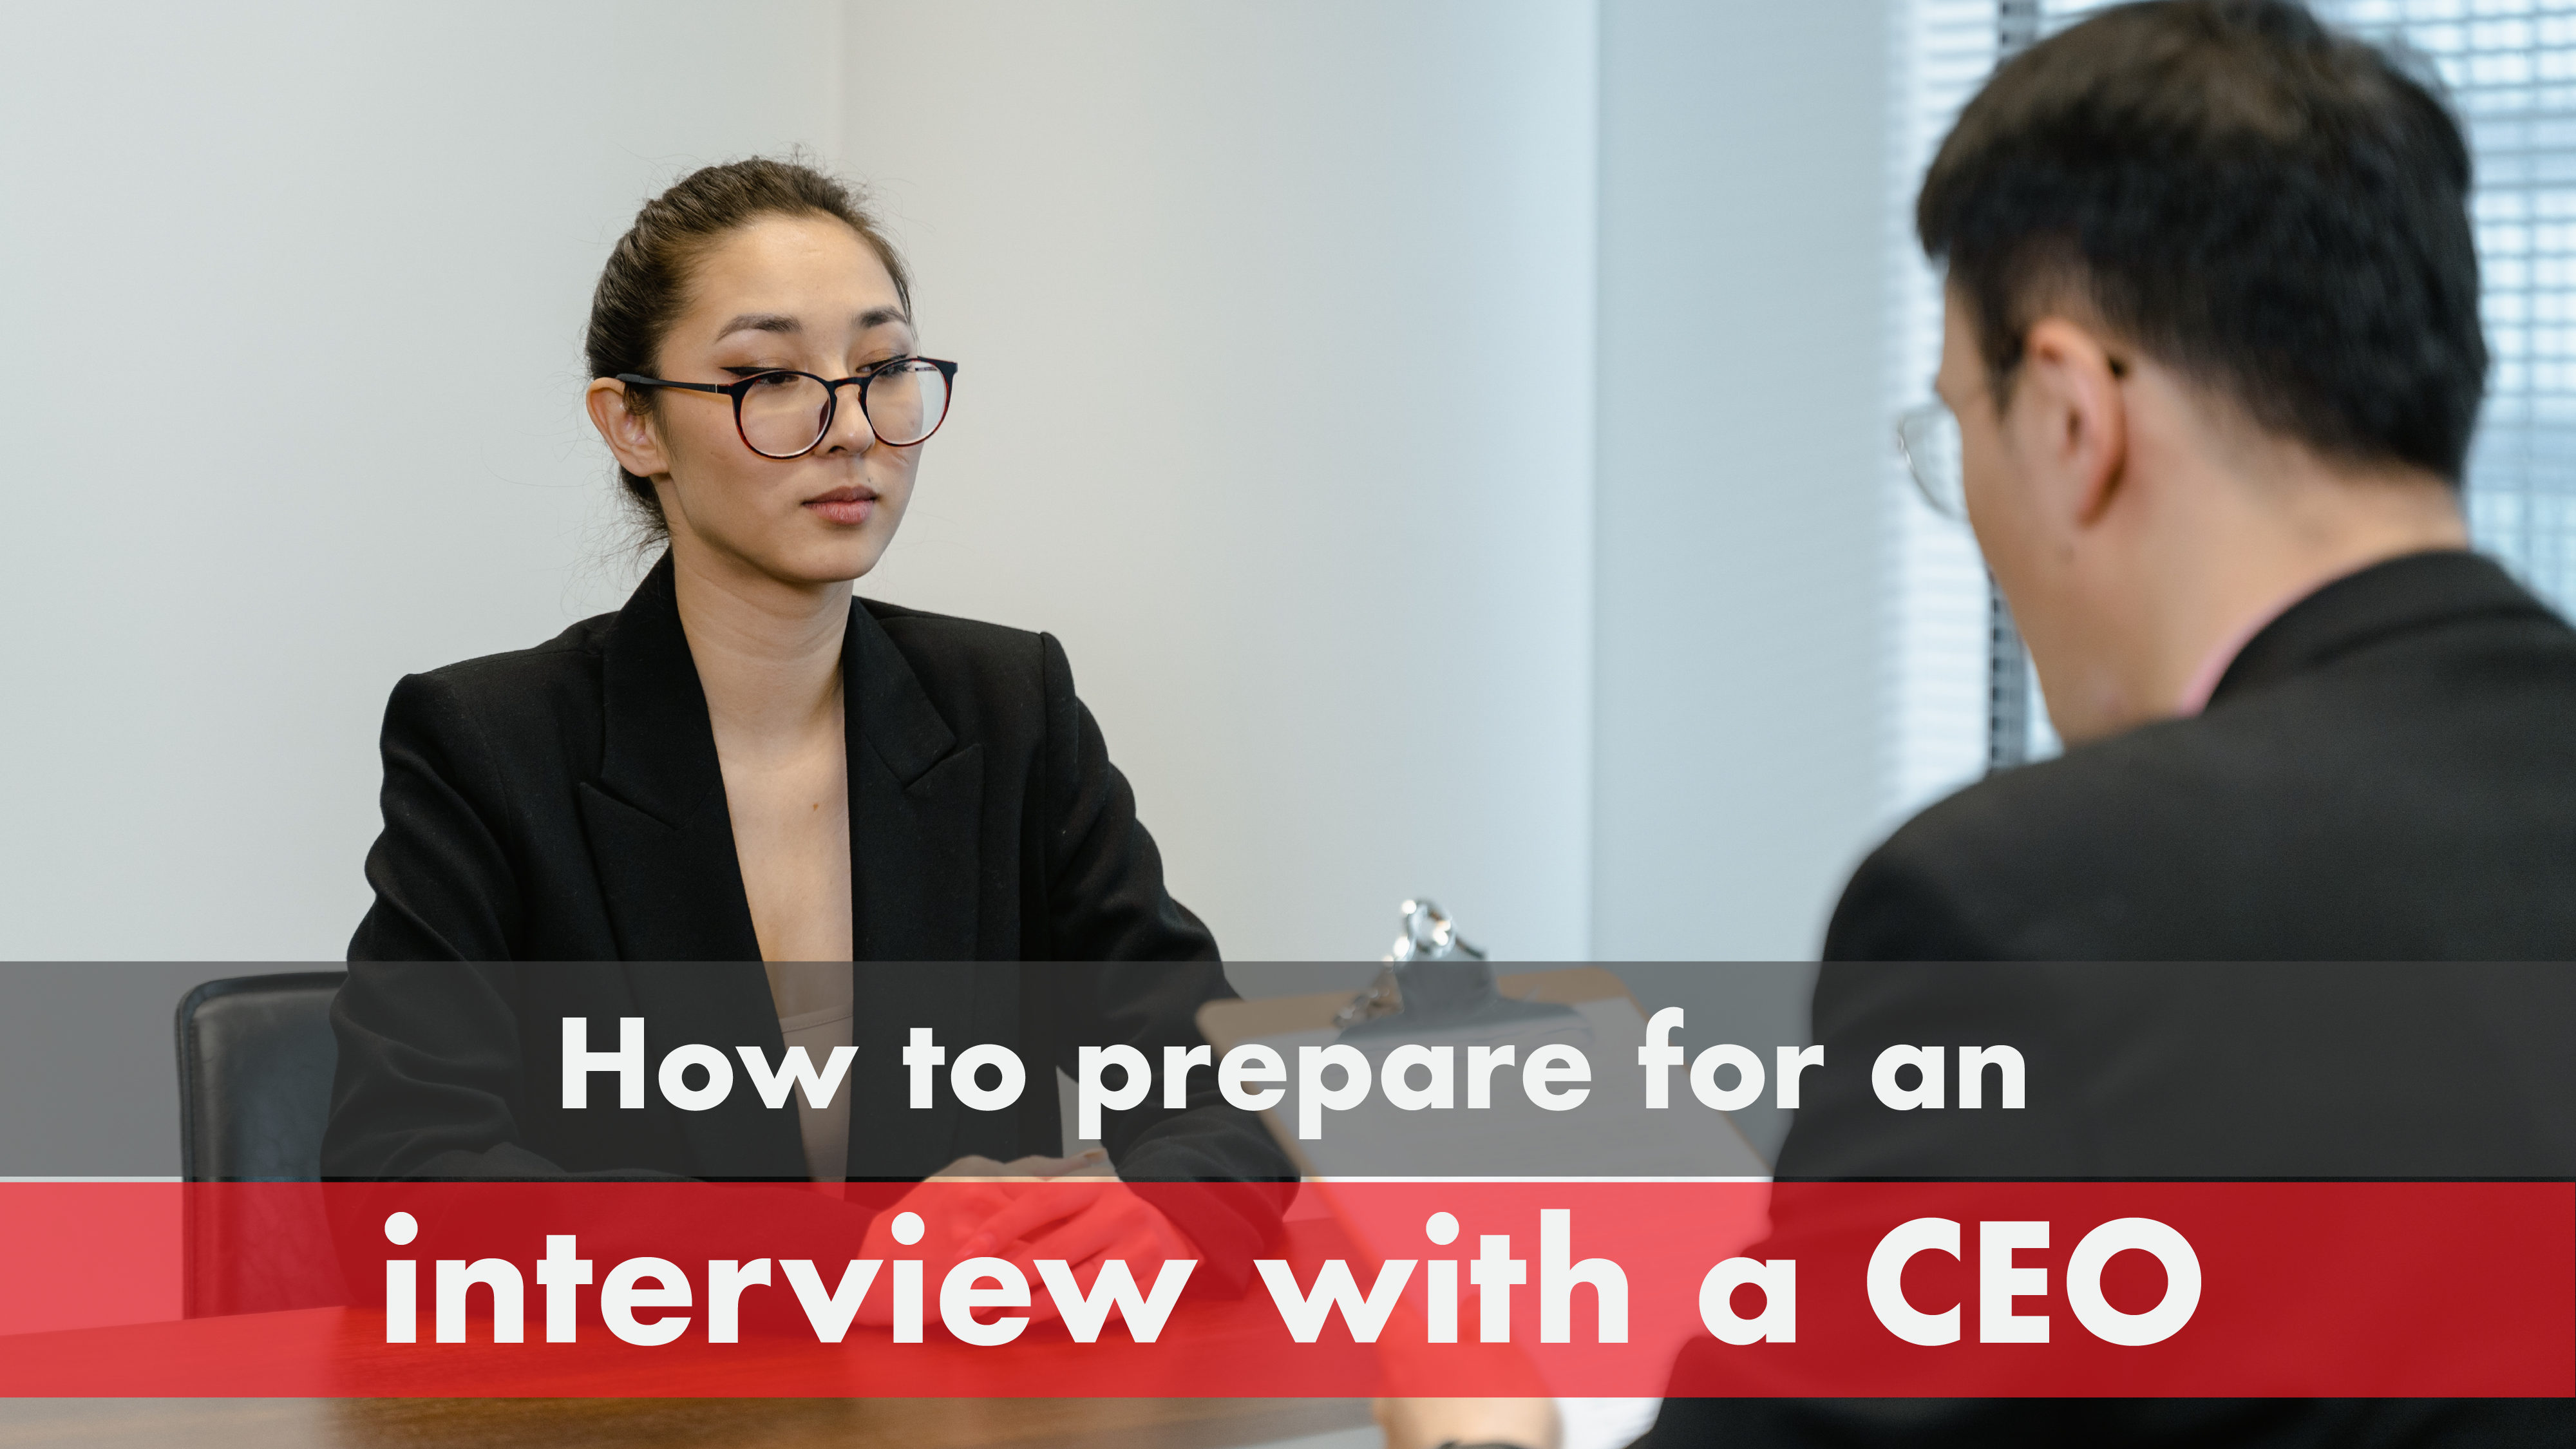 How to prepare for an interview with a CEO